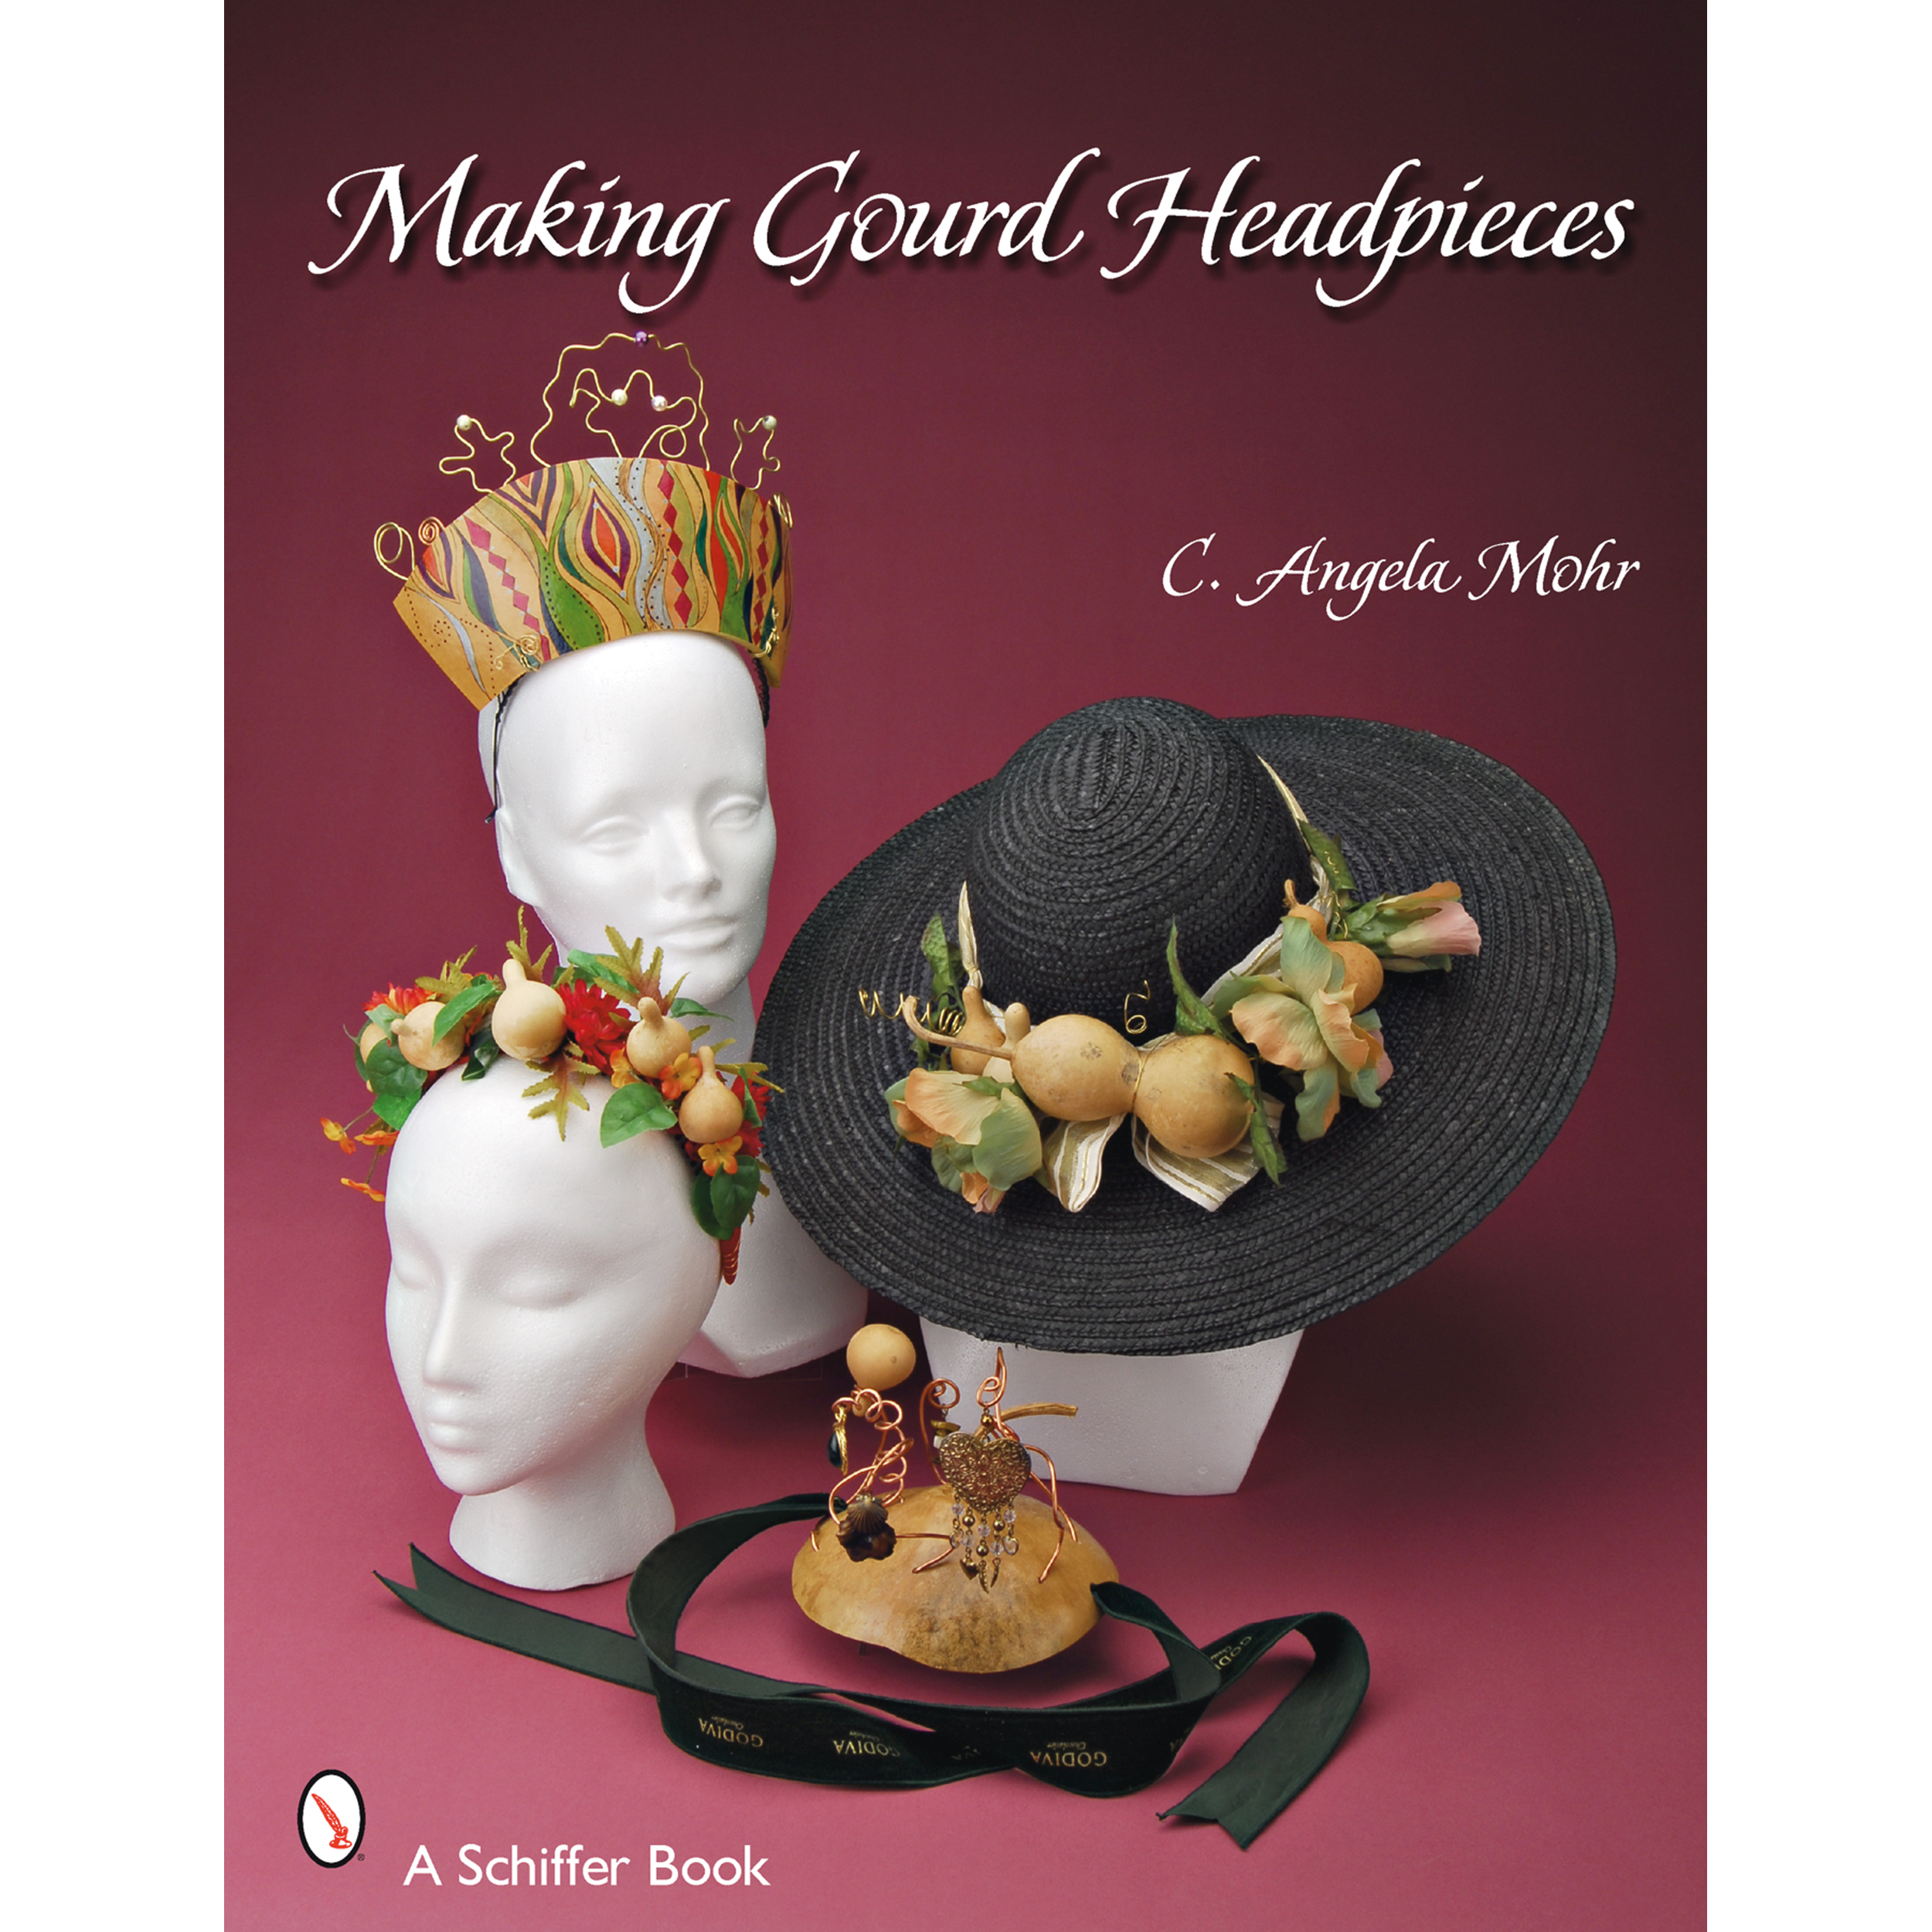 Making Gourd Headpieces: Decorating And Creating Headgear For Every Occasion